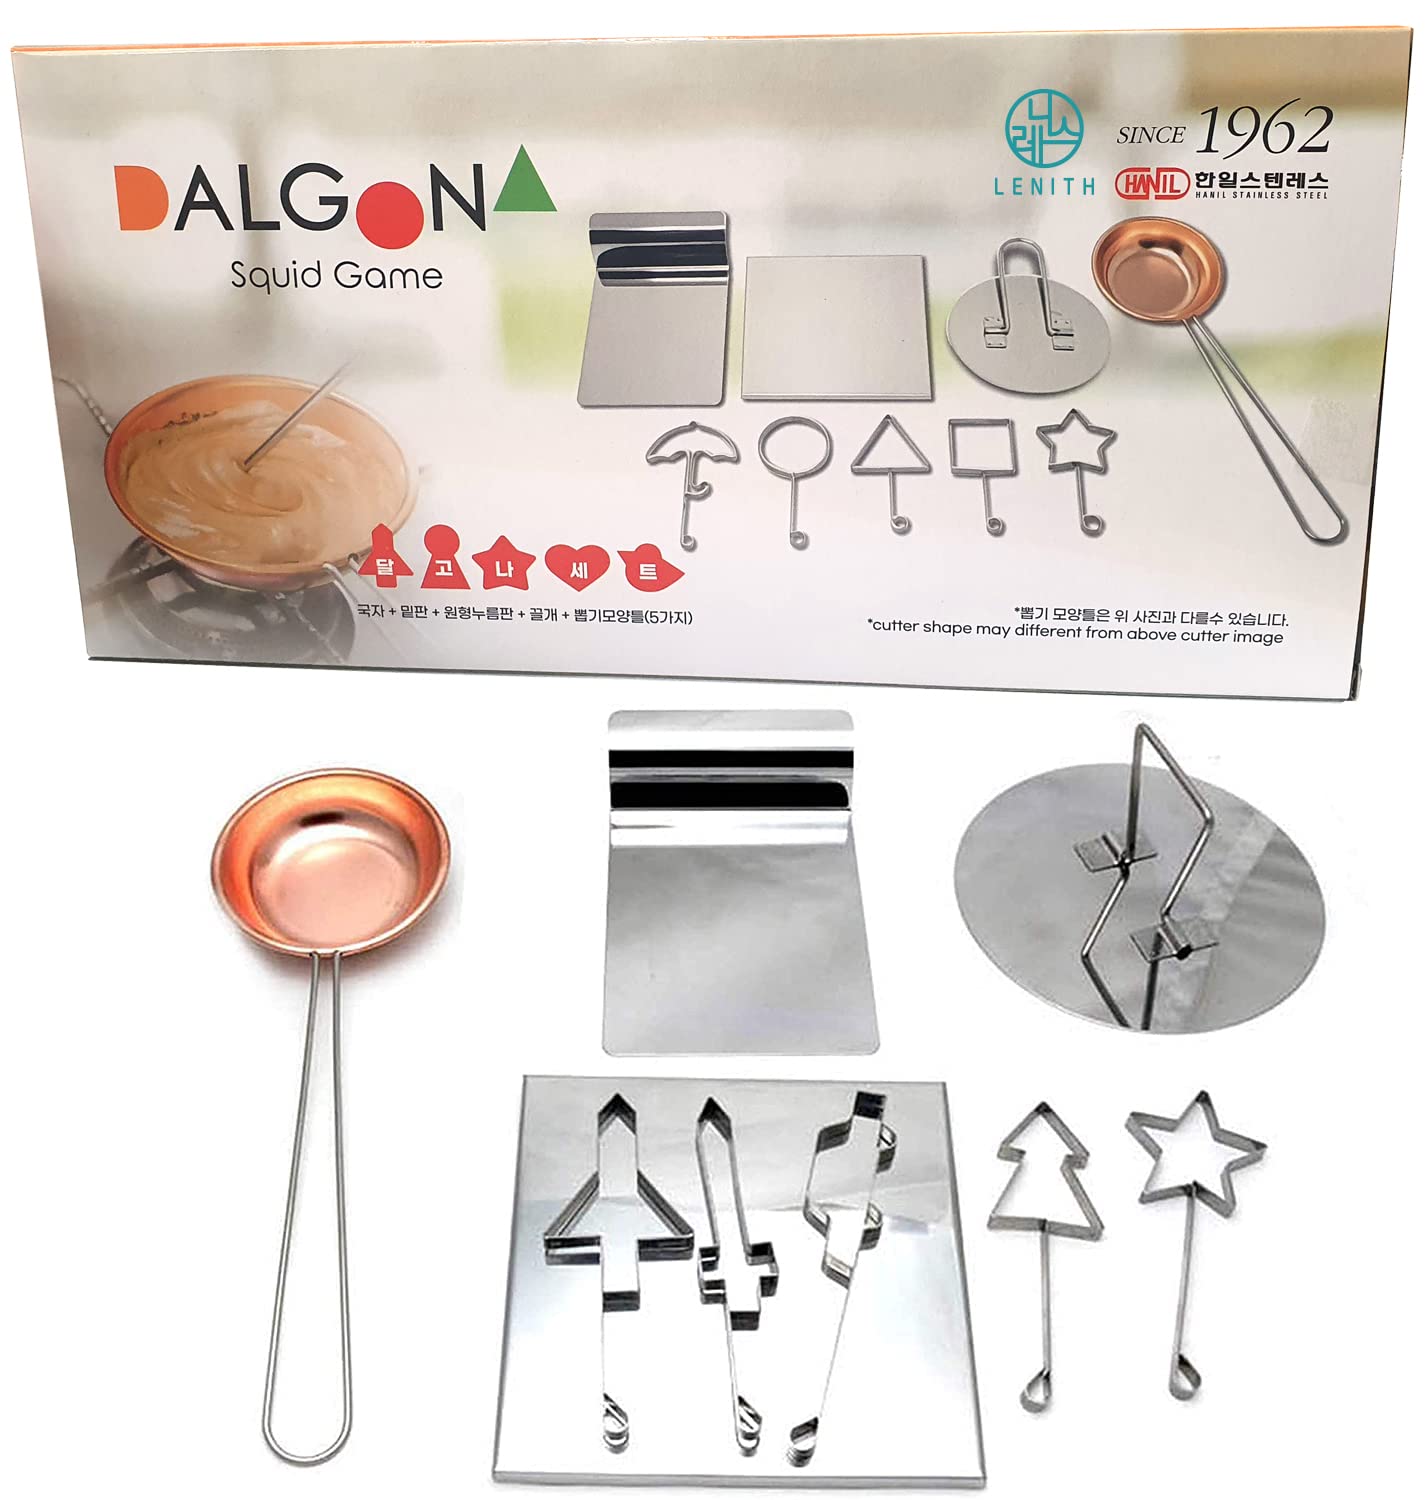 [LENITH] Dalgona Korean Squid Game Sugar Candy Cookies Stainless Copper Plate Making Tools 9pcs Set